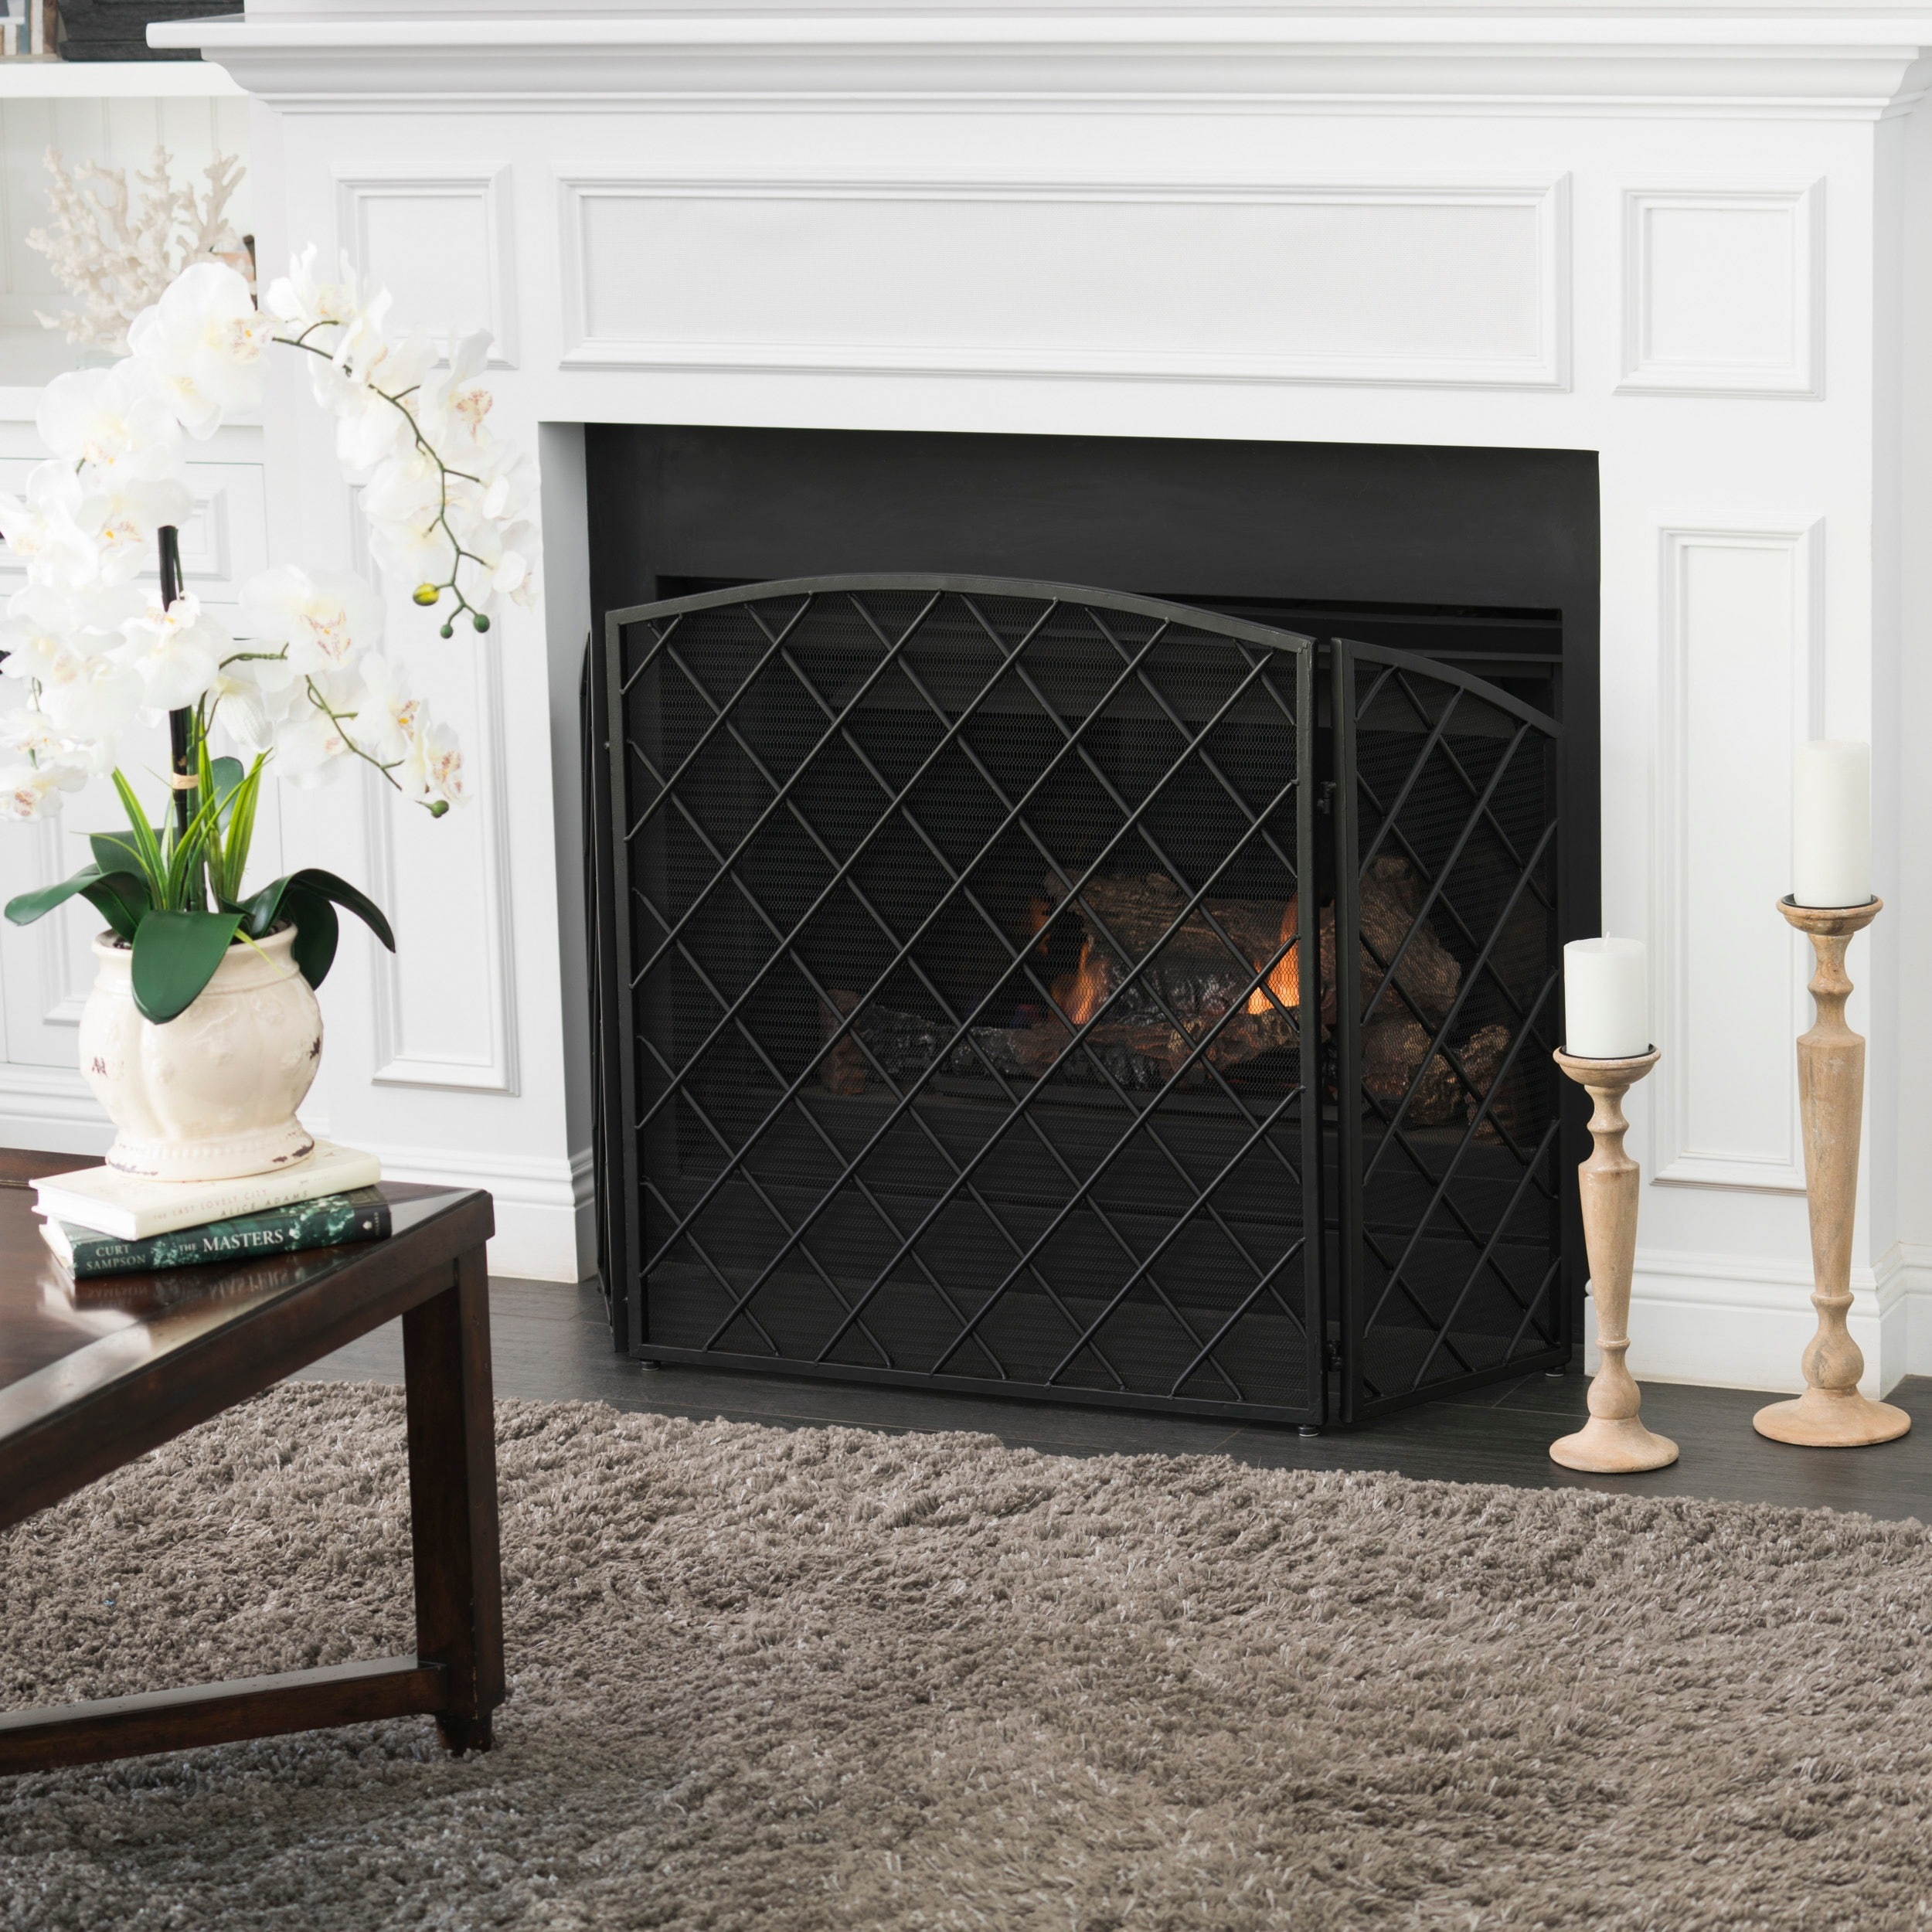 Amiyah 3-Panel Fireplace Screen by Christopher Knight Home Bed Bath   Beyond 17363099